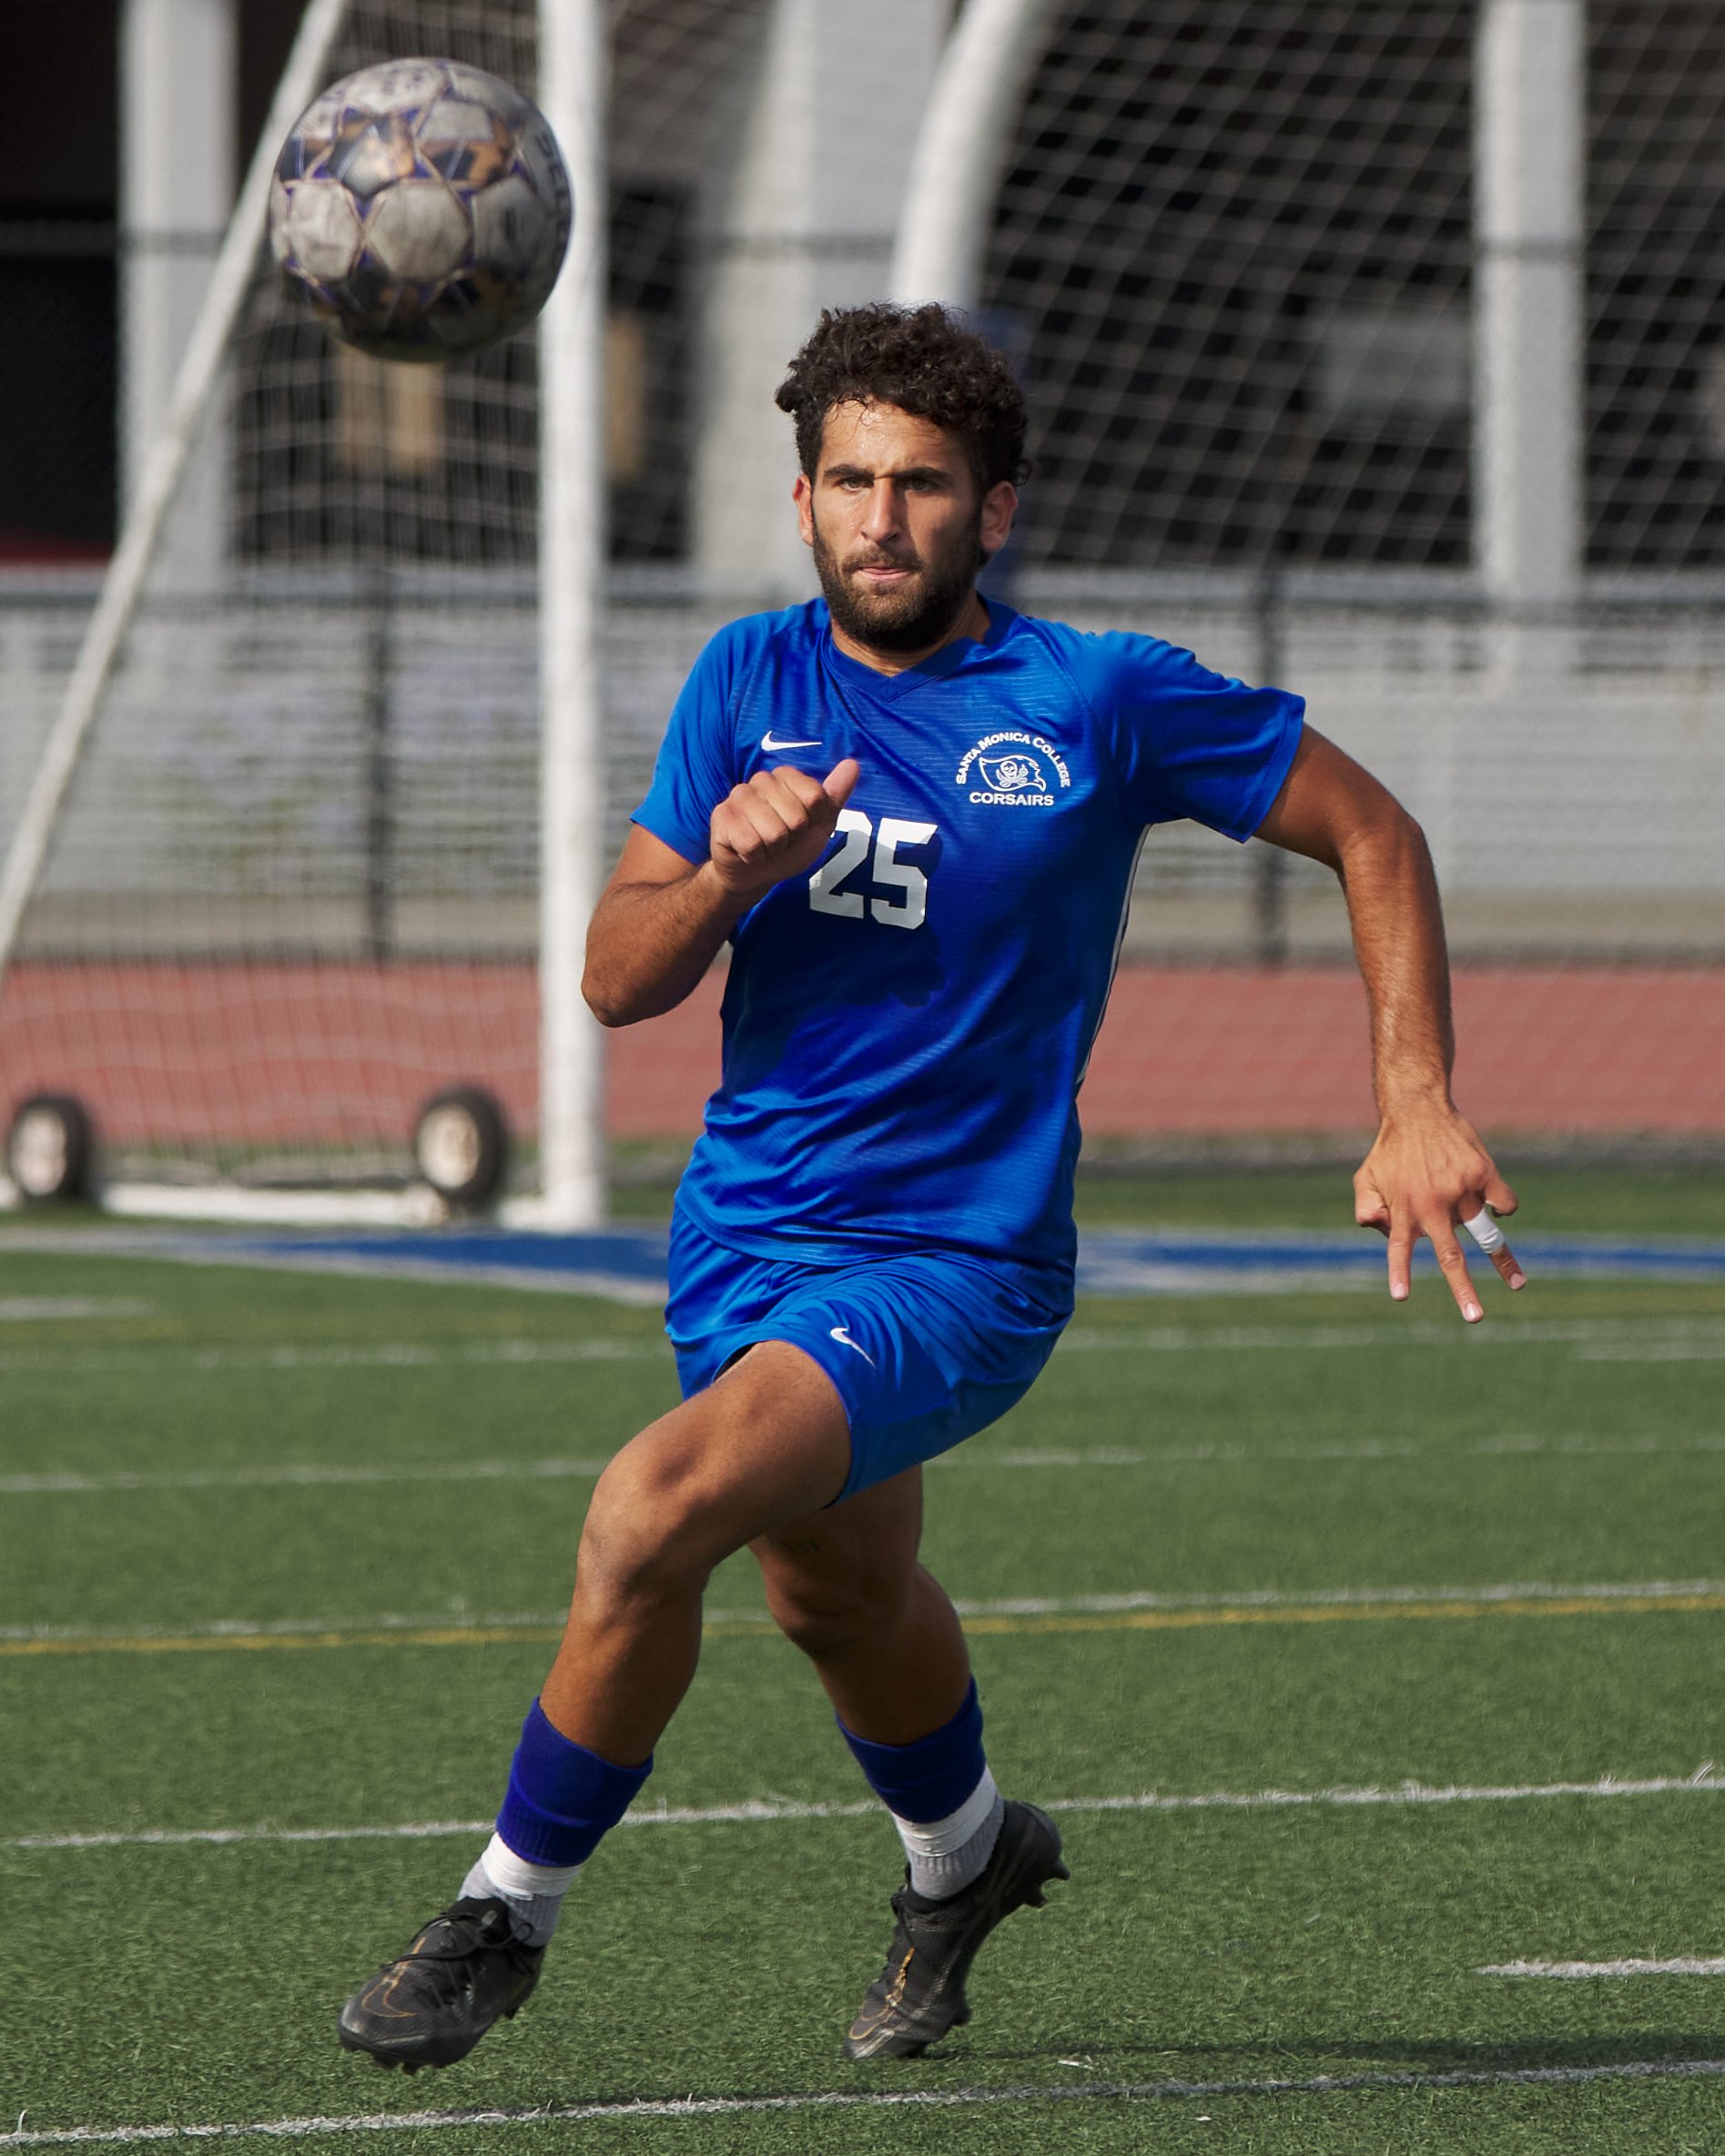  Santa Monica College Corsairs' Adam Abou-Hamad during the men's soccer match against the Los Angeles Mission College Eagles on Tuesday, Nov. 1, 2022, at Corsair Field in Santa Monica, Calif. The Corsairs won 3-0. (Nicholas McCall | The Corsair) 